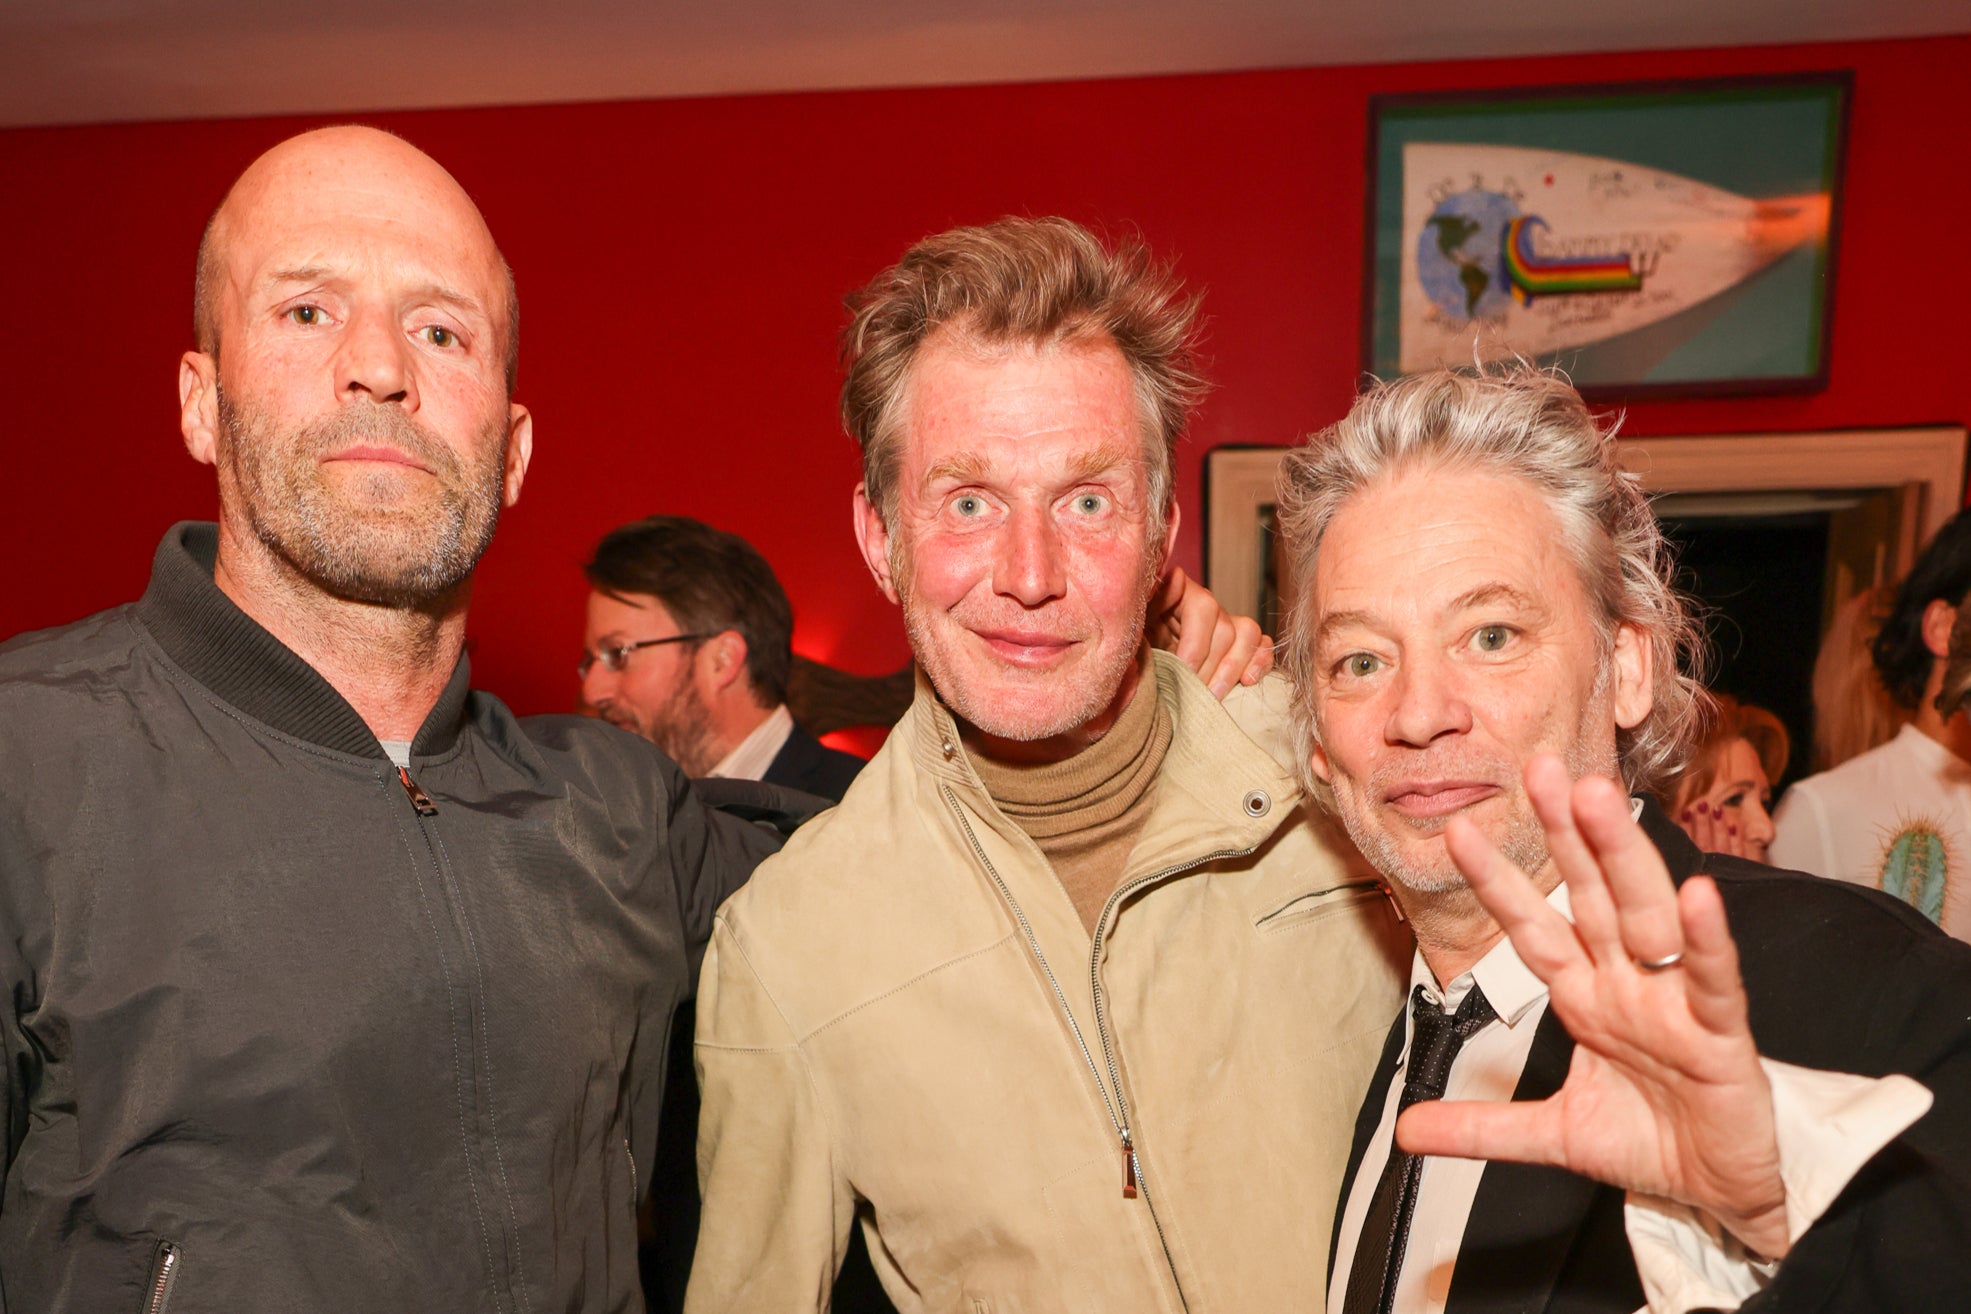 Friends reunited: Jason Statham, Jason Flemyng and Dexter Fletcher at the ‘Ghosted’ premiere in April